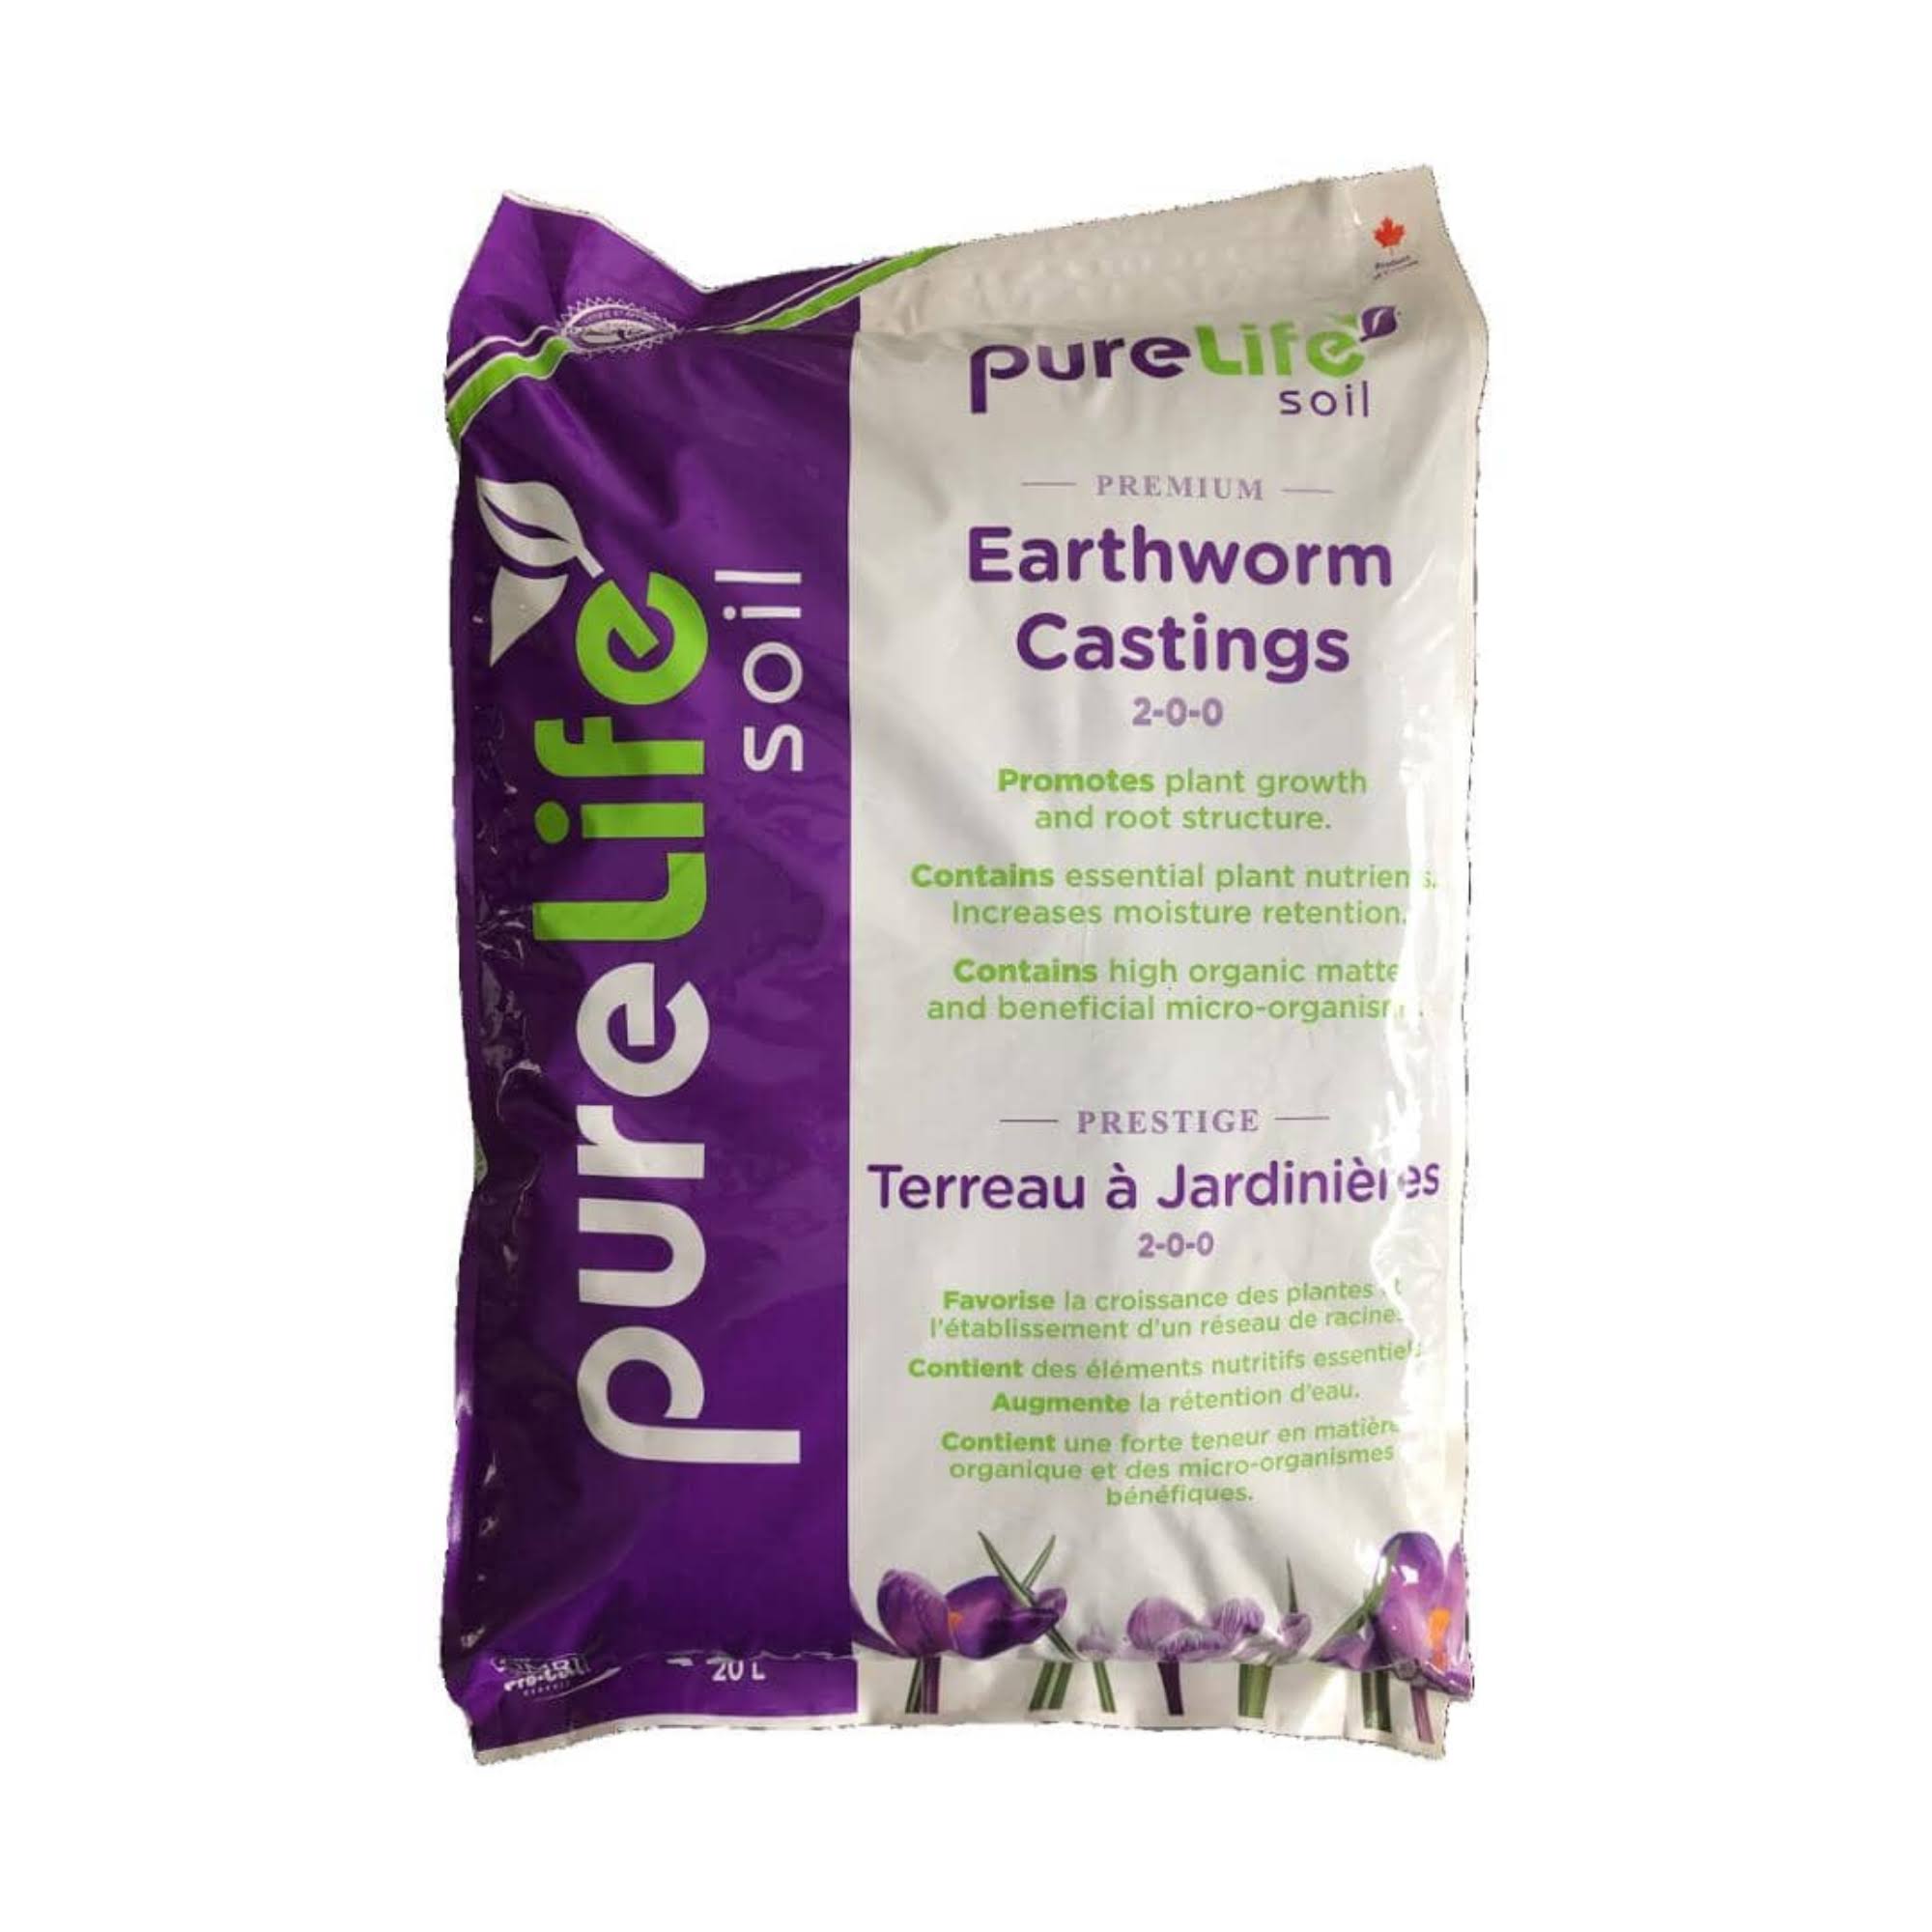 Pure Life Earthworm Castings 20 Liter Pure Life